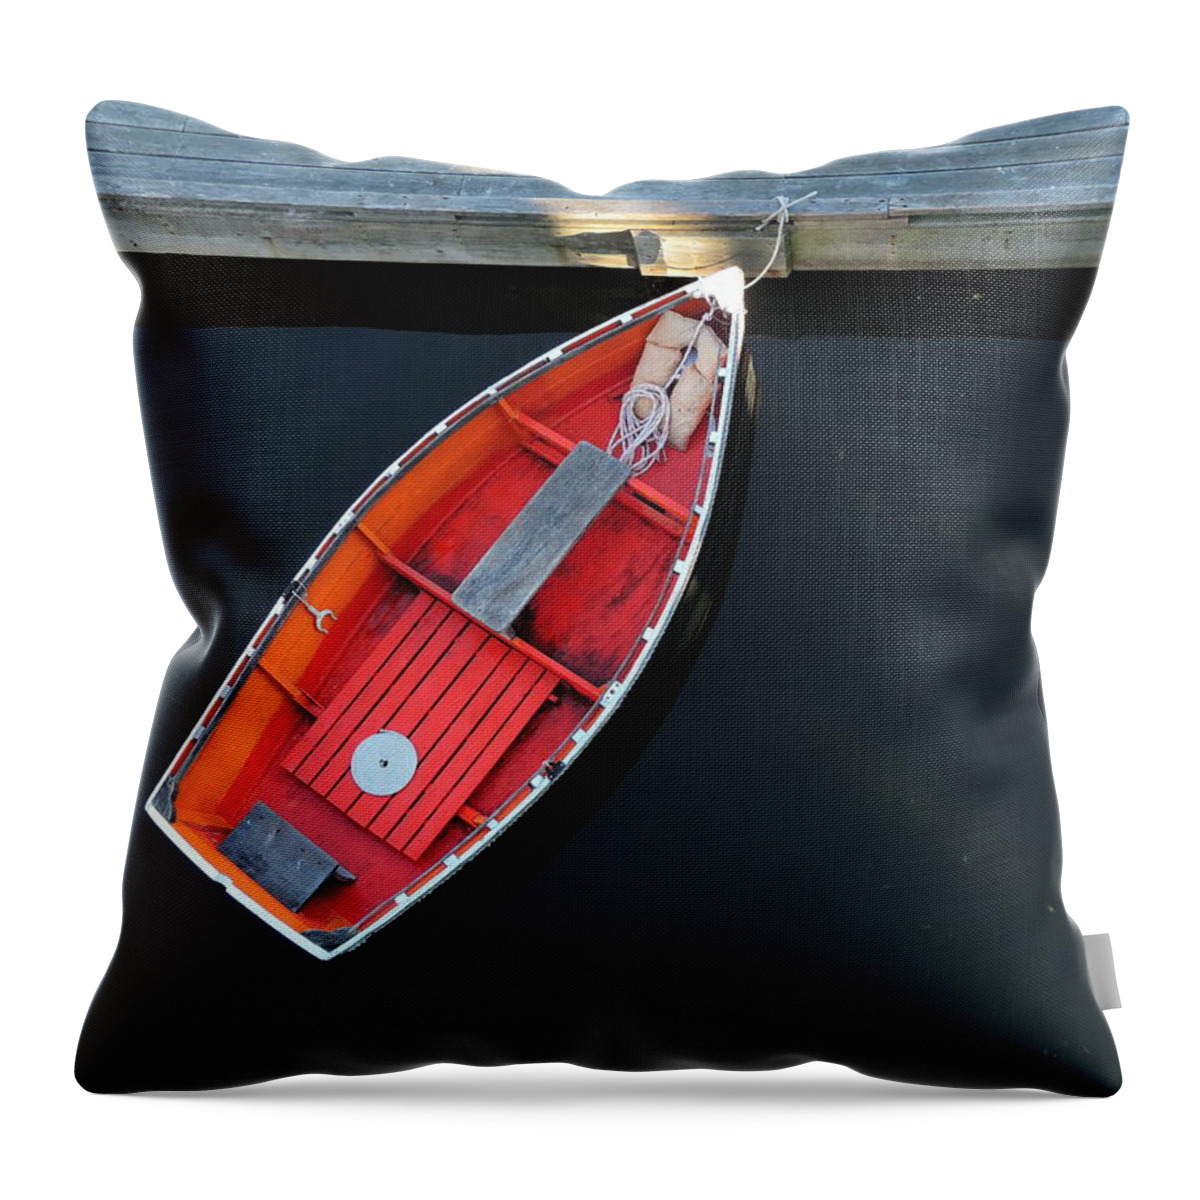 Colorful Throw Pillow featuring the photograph Orange Dinghy by Bill Tomsa